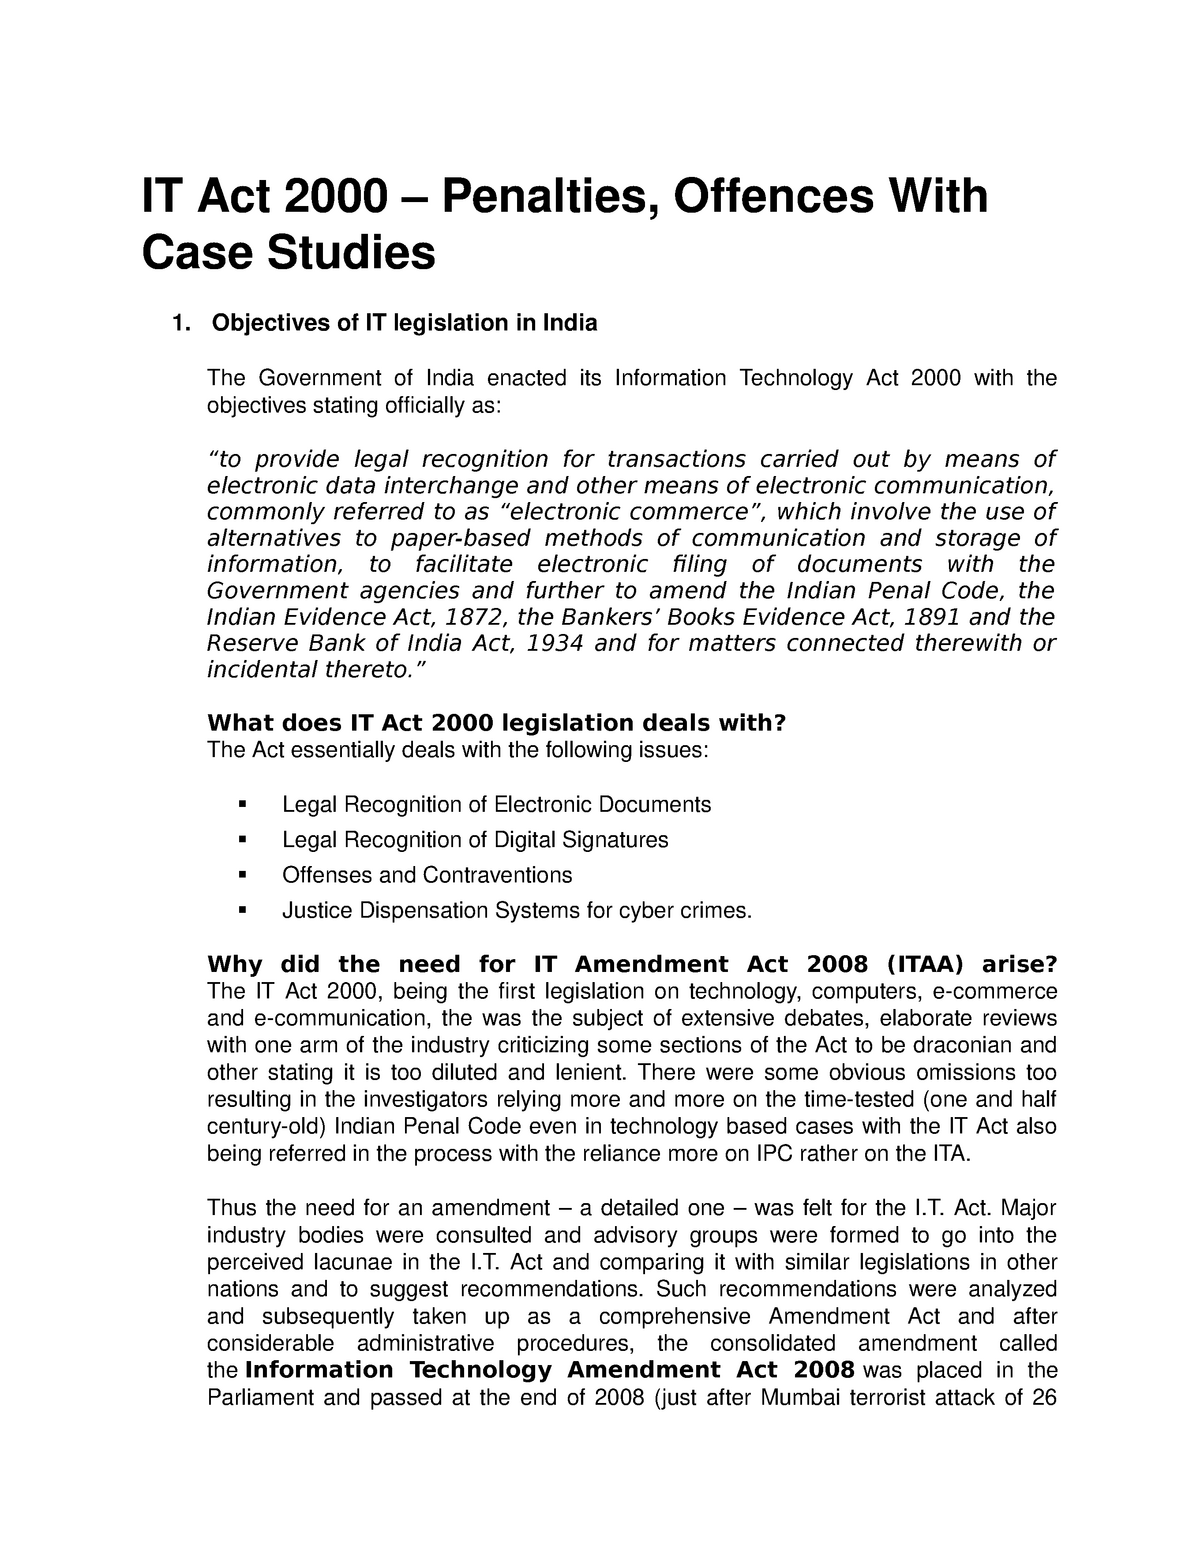 case study on section 67 of it act 2000